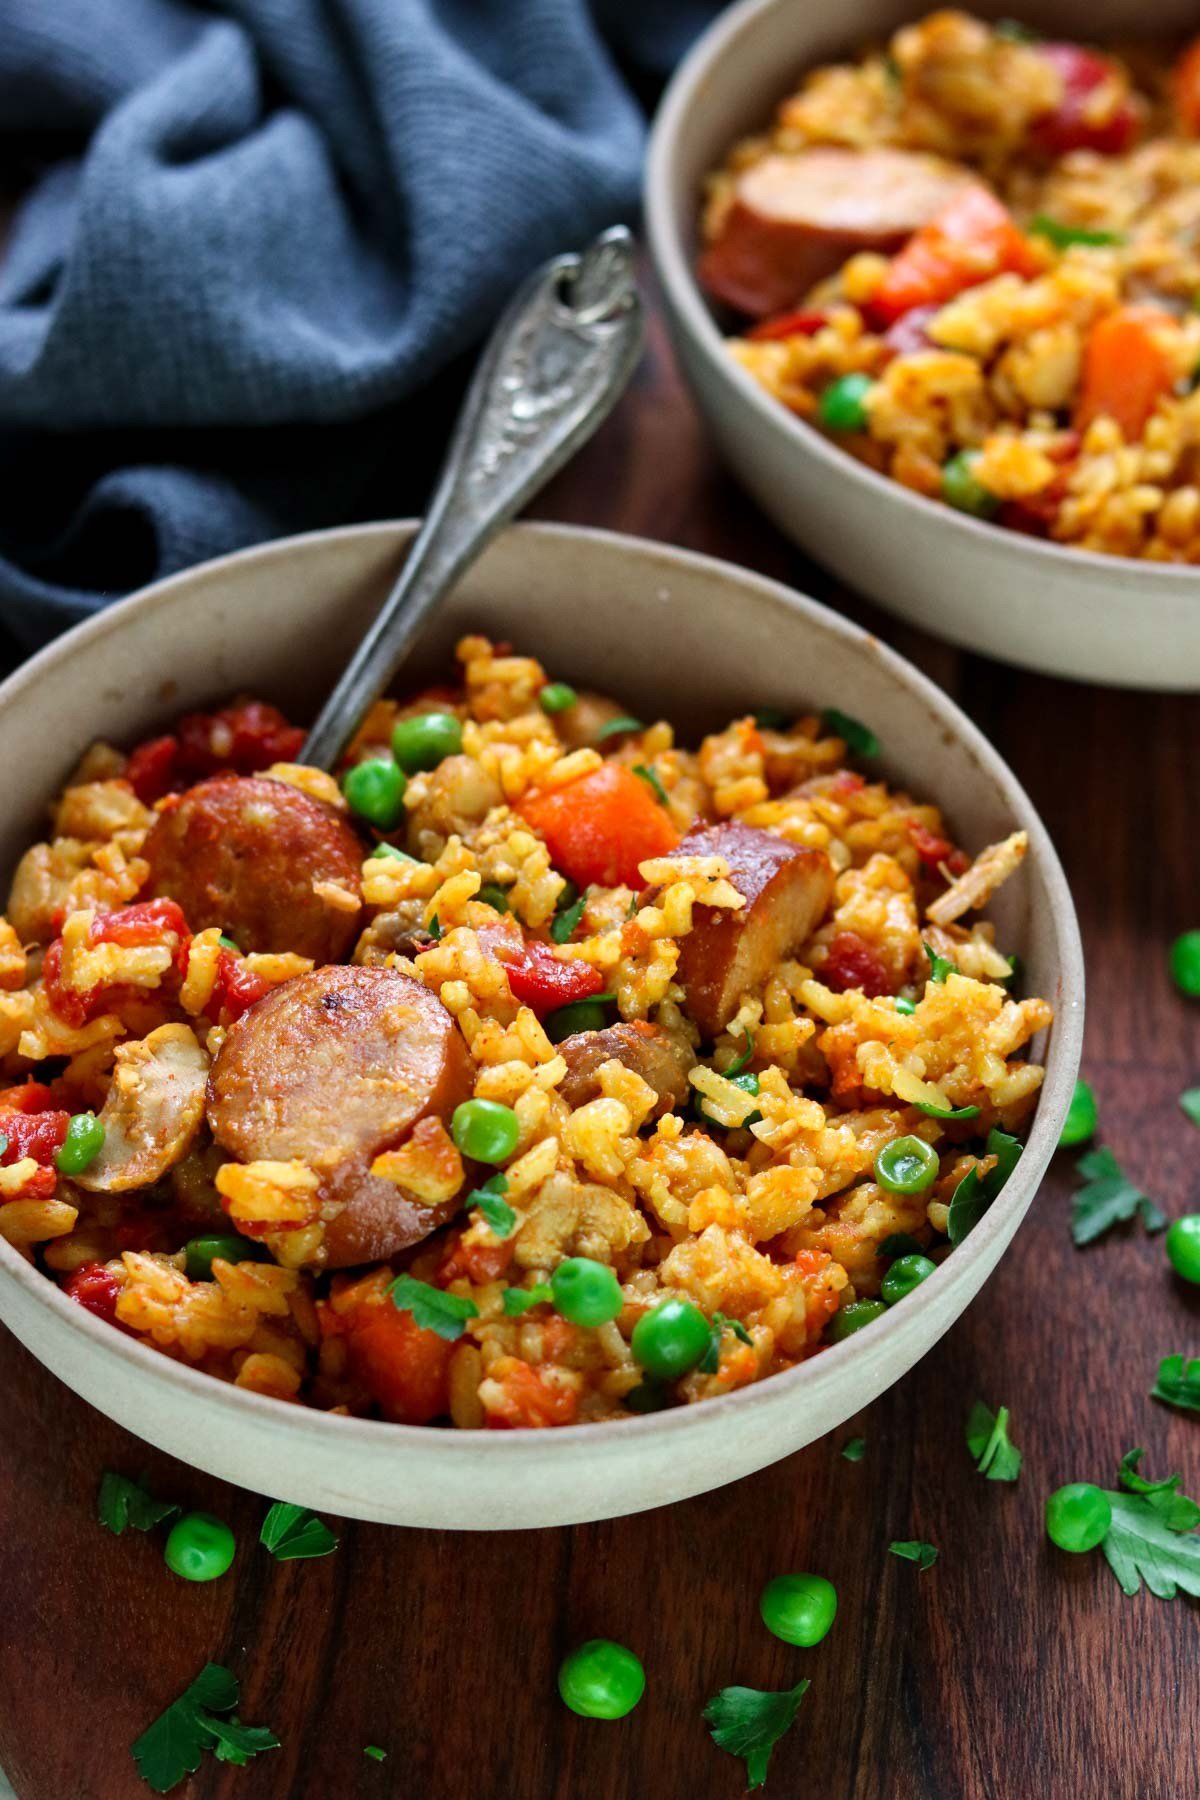 Bowl of cajun rice with chicken and sausage.